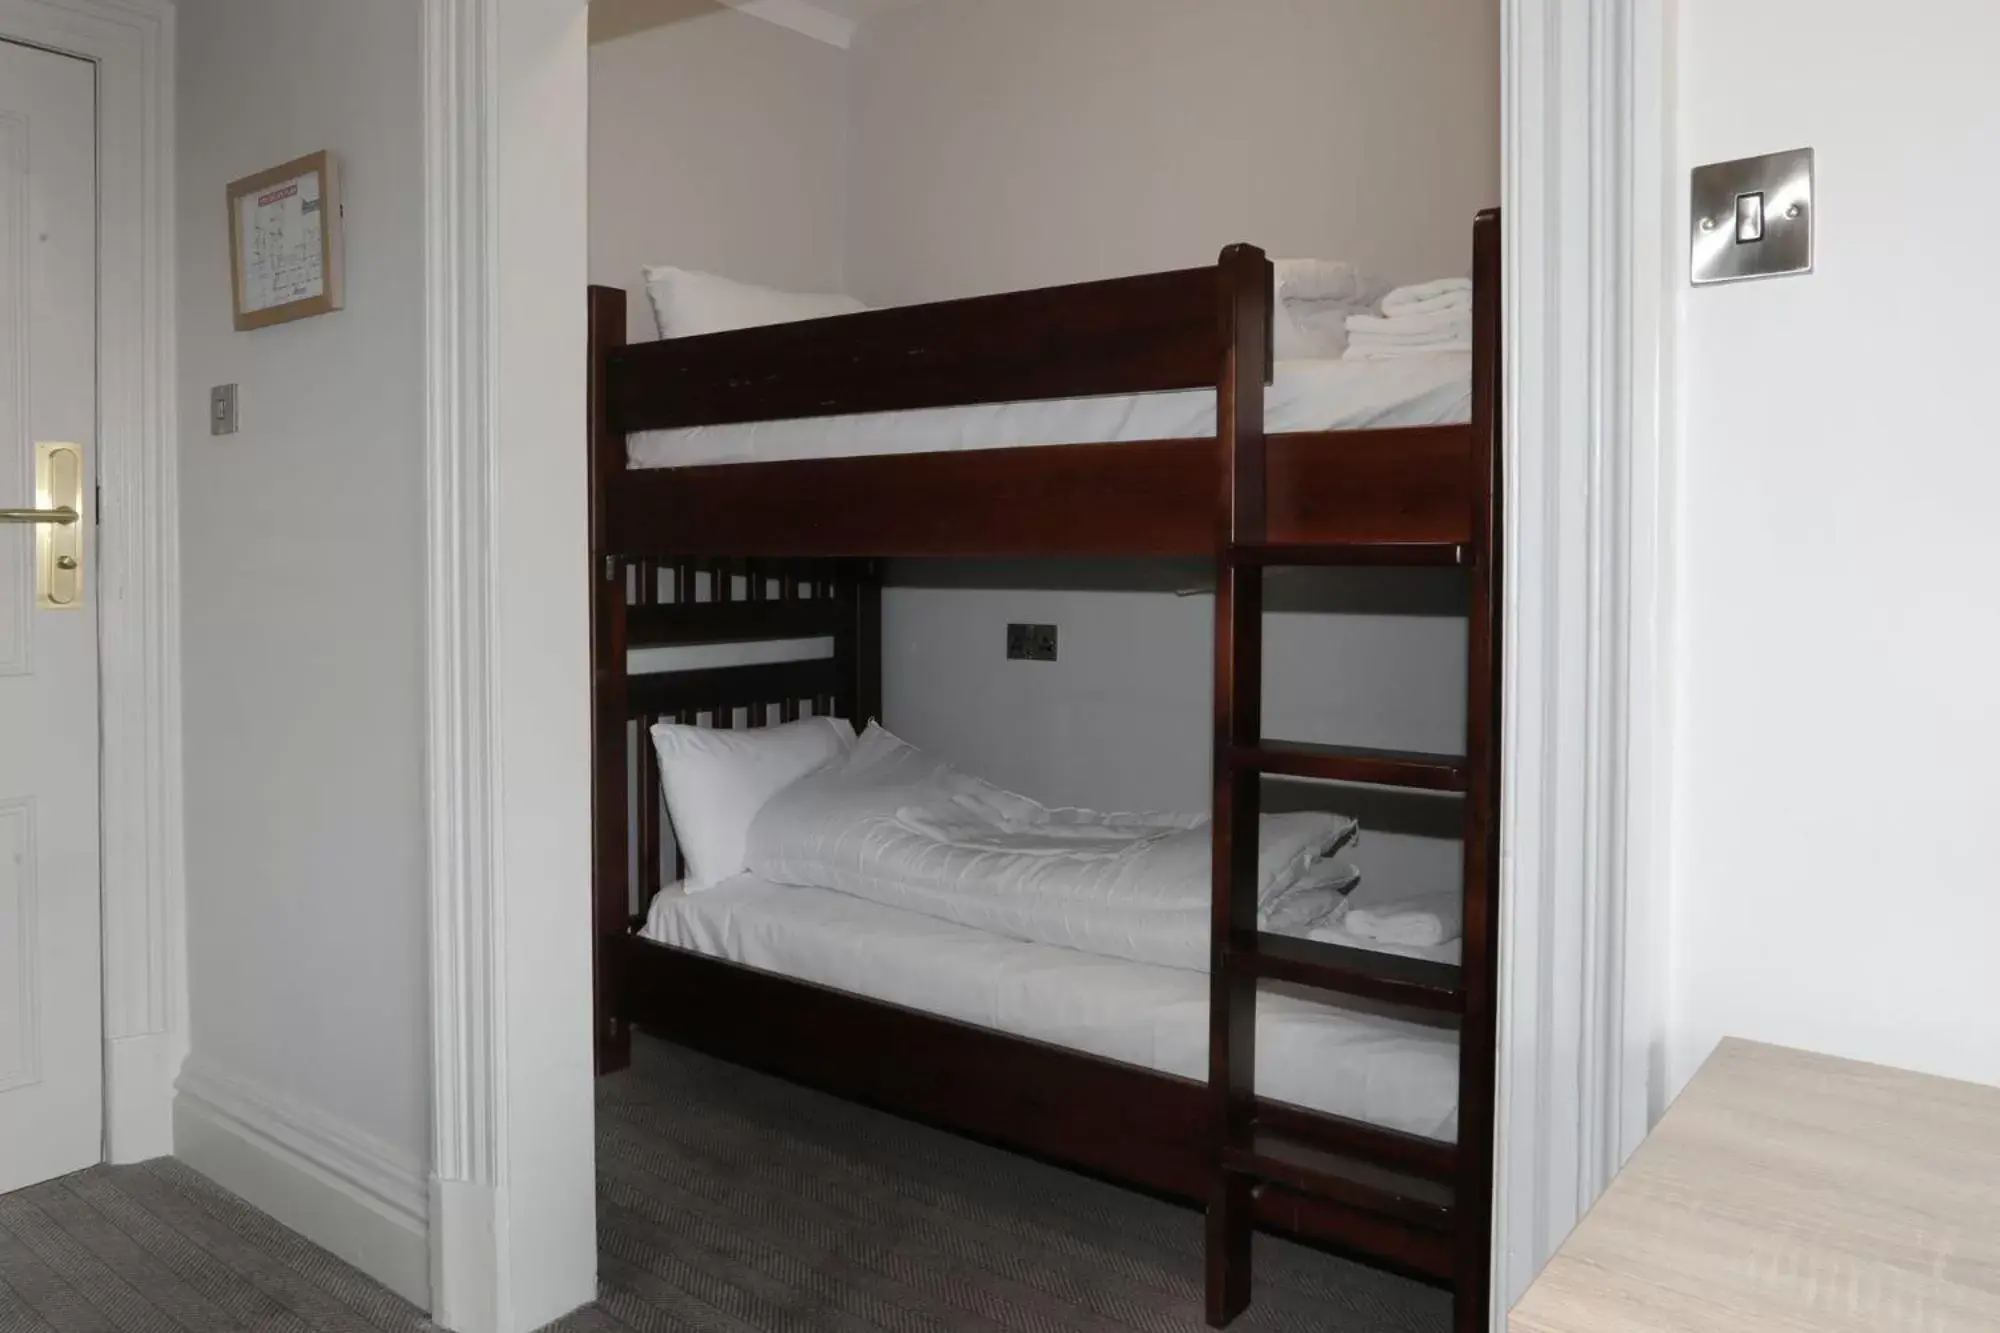 Bunk Bed in The Harrogate Inn - The Inn Collection Group